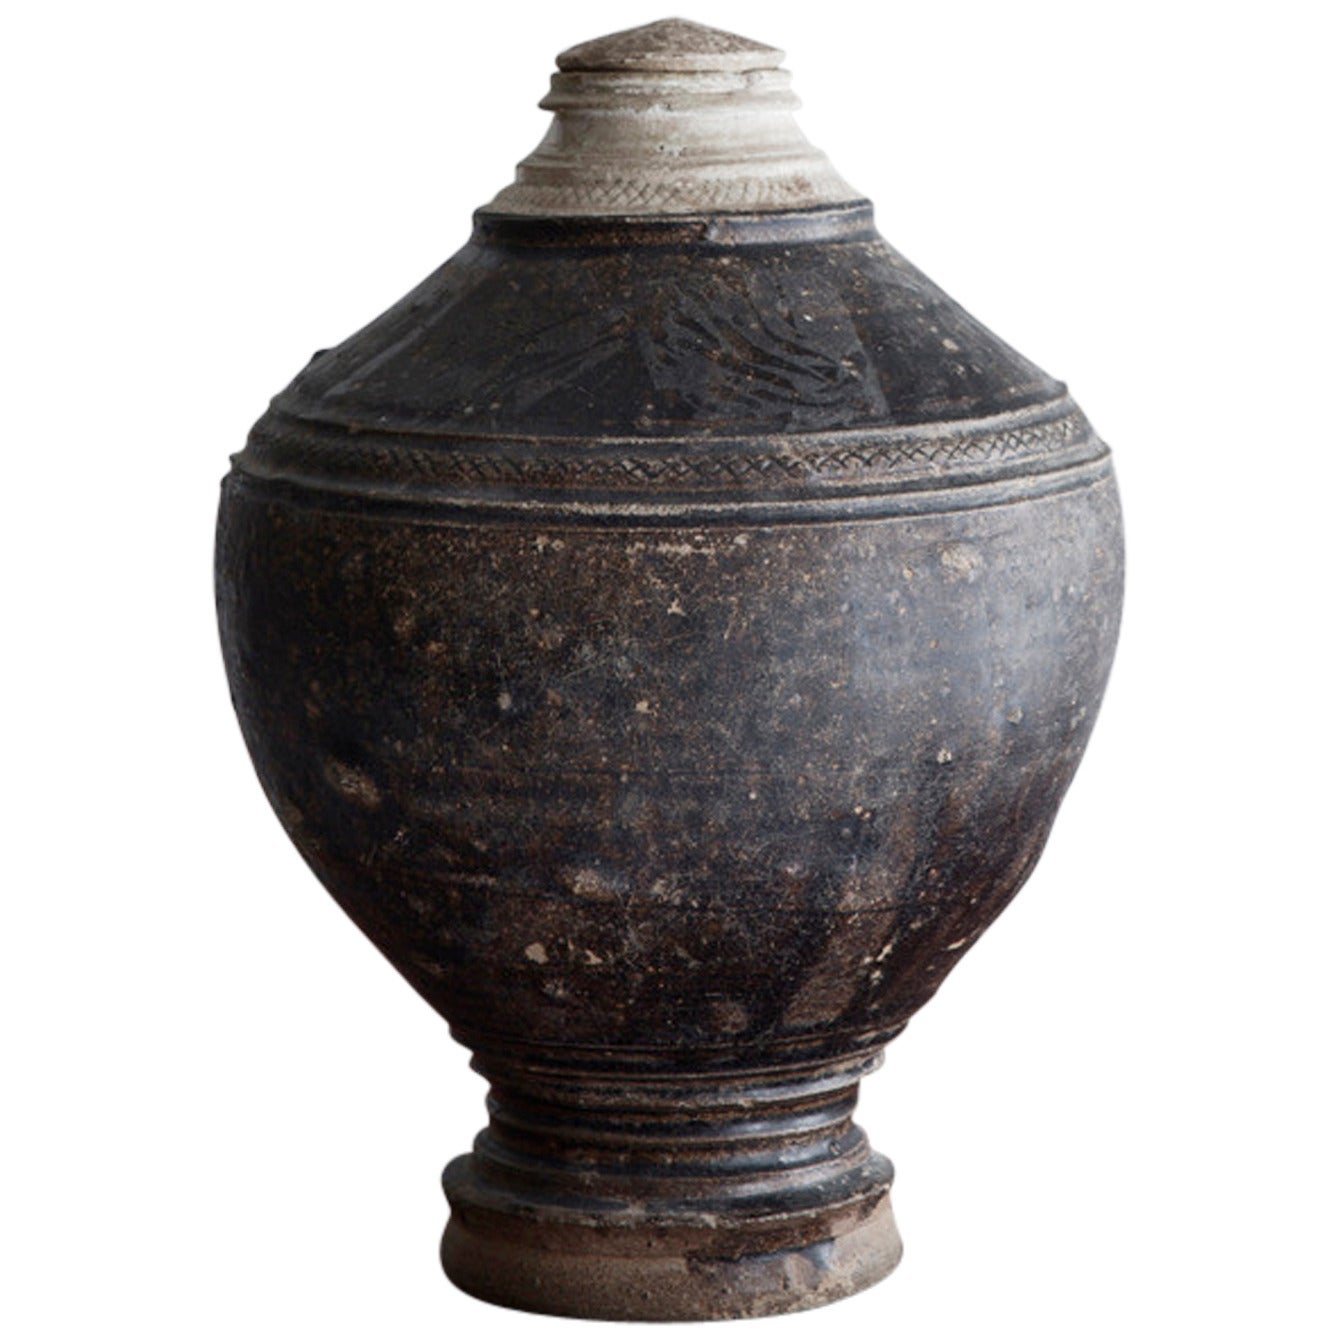 Lovely Antique Khmer Jar with Lid